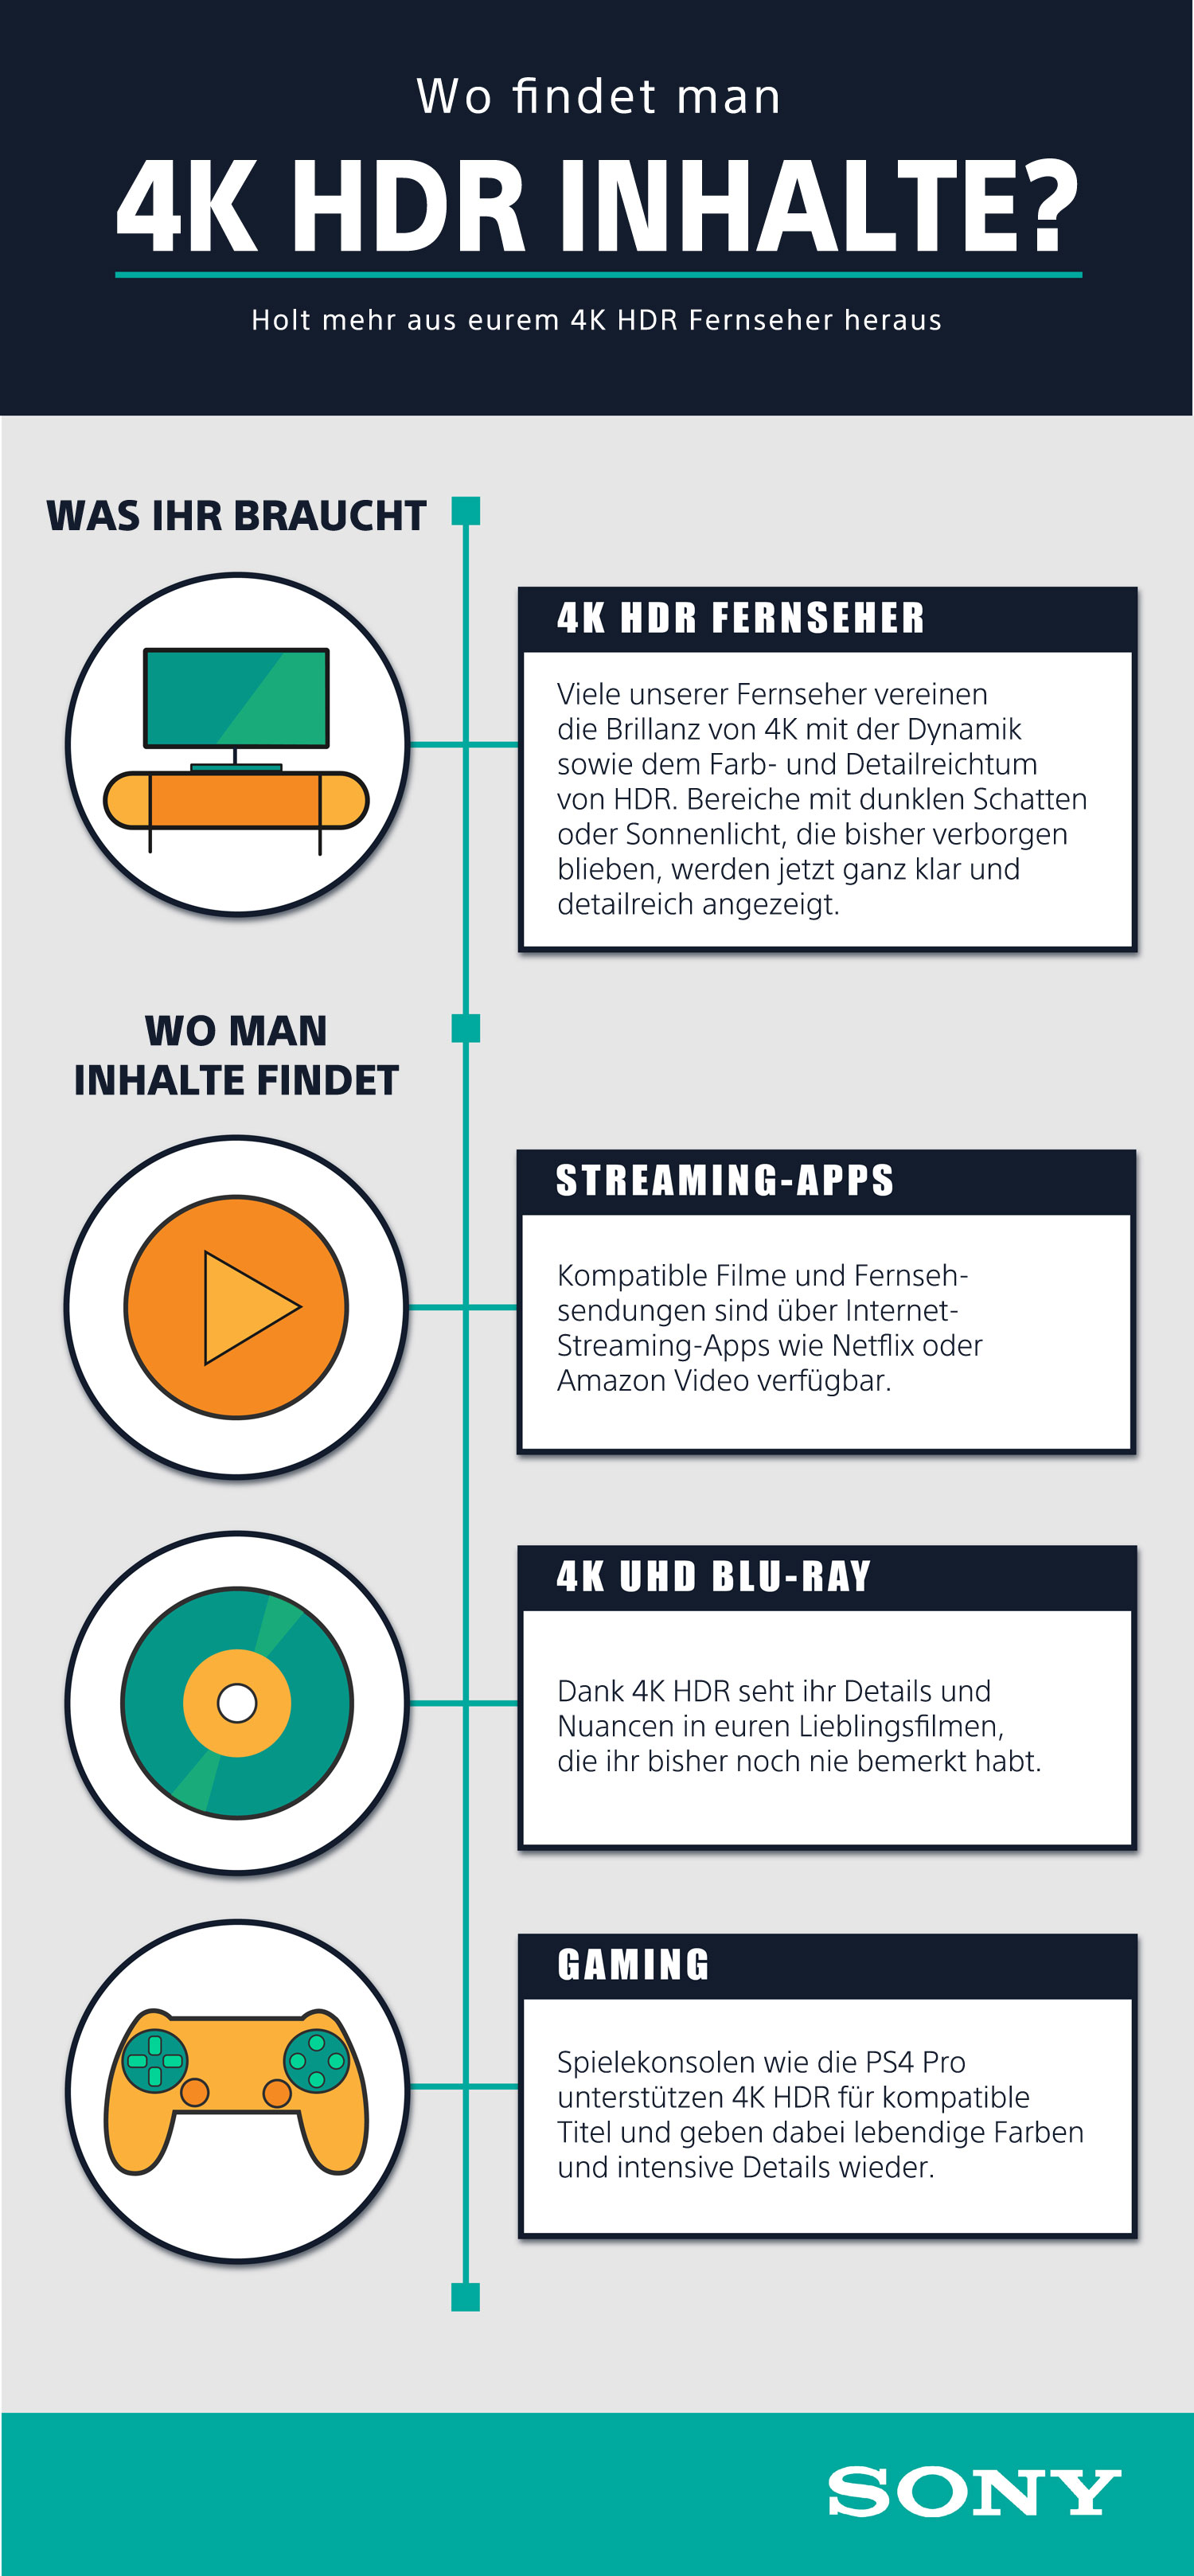 Where-to-Find-4K-HDR-Content-Infographic-GERMAN.jpg